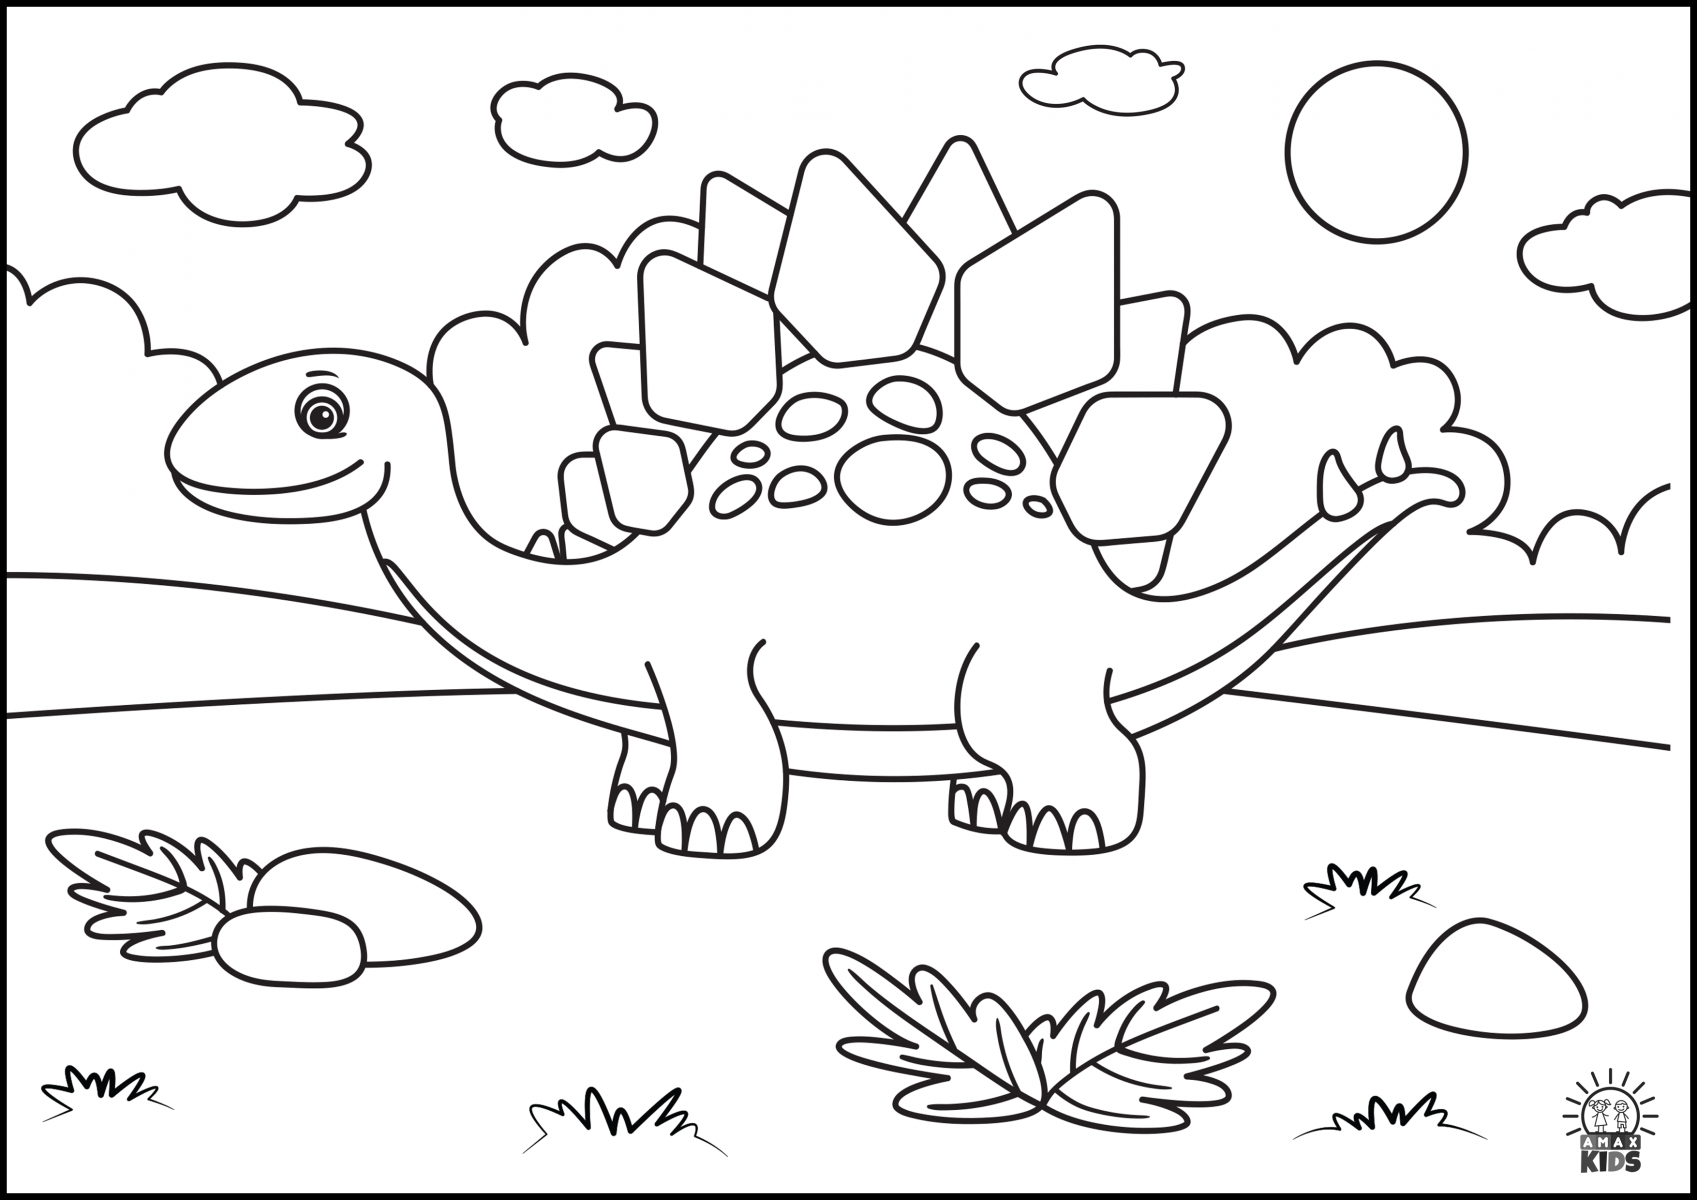 Coloring pages for kids with dinosaurs | Amax Kids